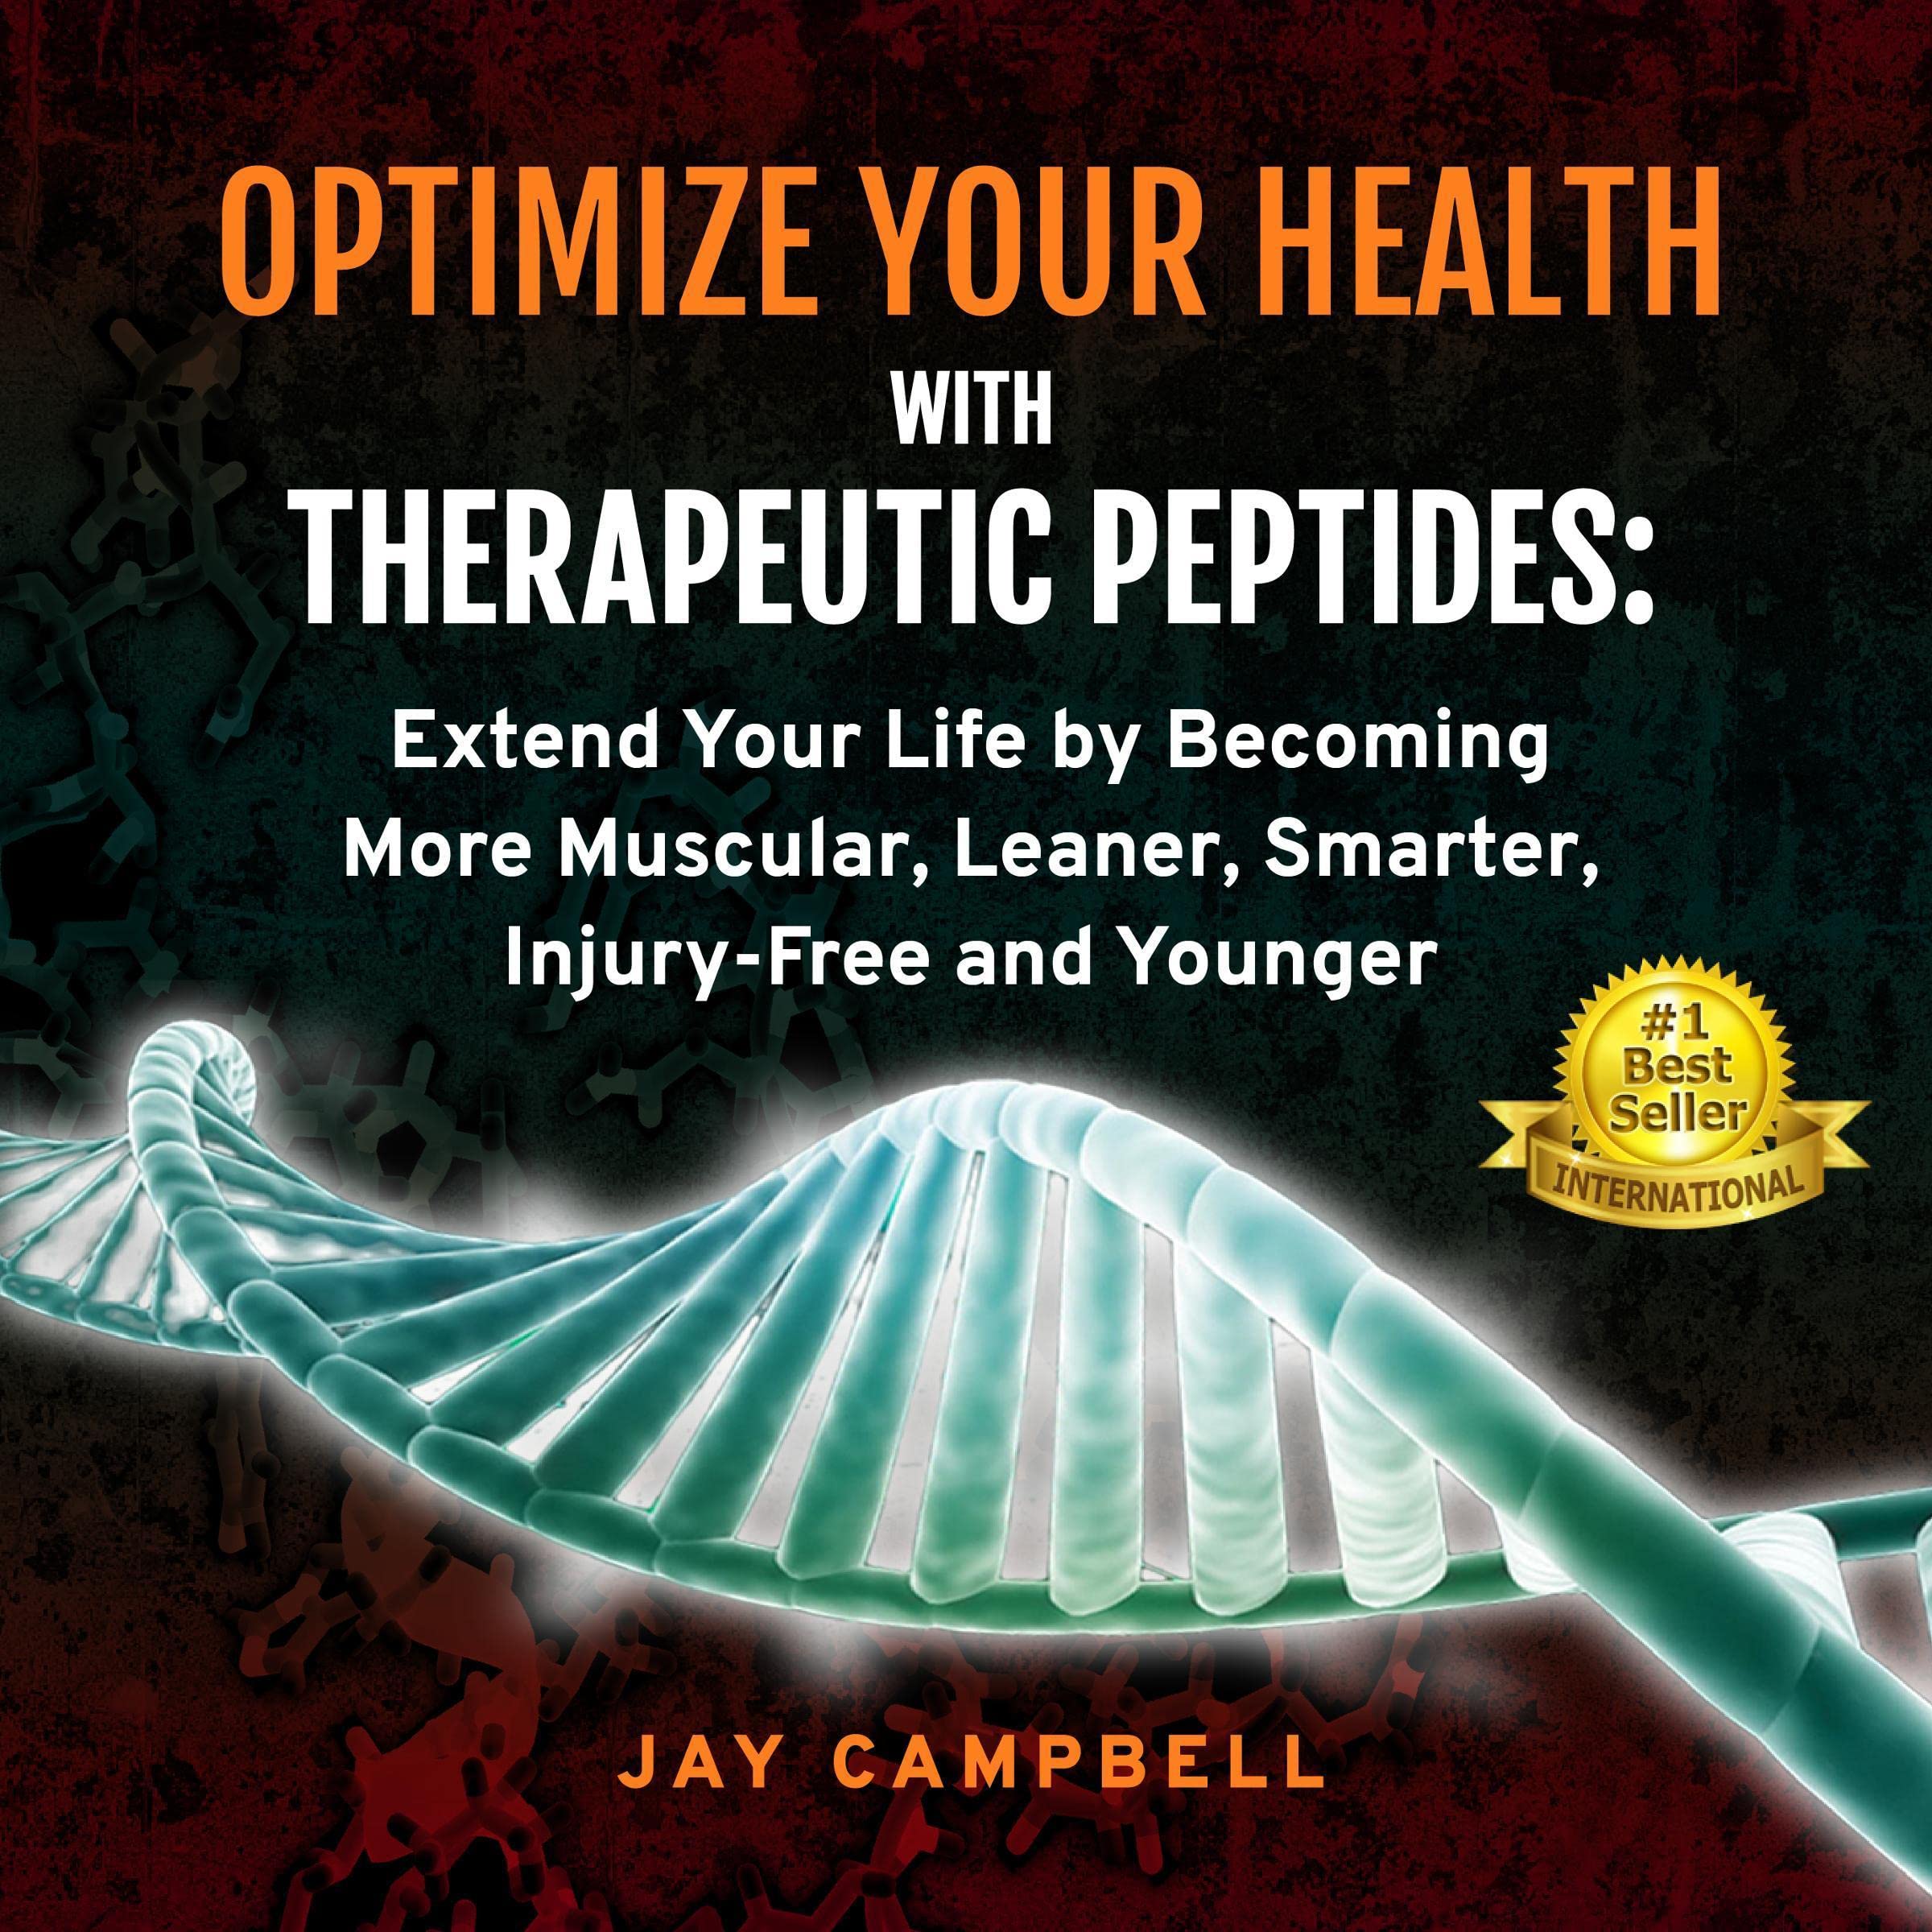 Optimize Your Health with Therapeutic Peptides: Extend Your Life by Becoming More Muscular, Leaner, Smarter, Injury-Free, and Younger